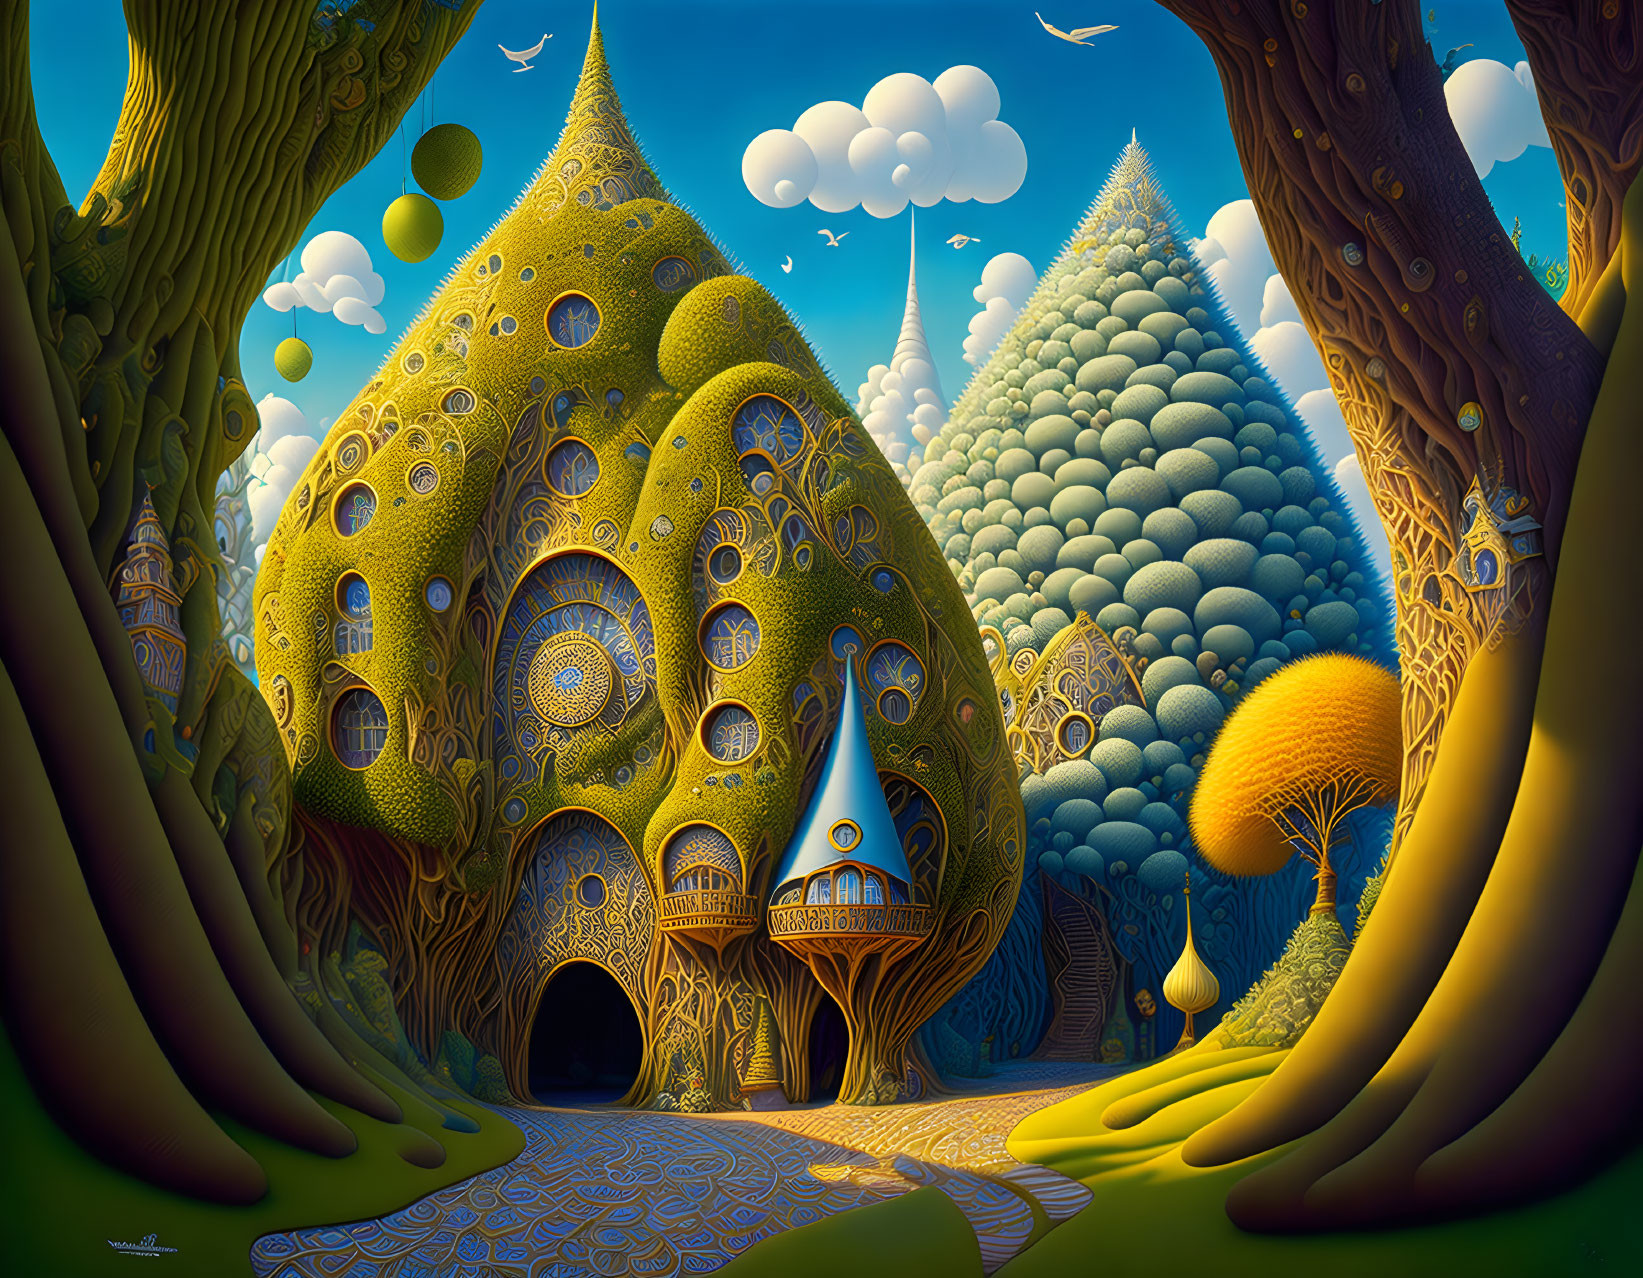 Fantastical tree-shaped houses in a lush, circular-patterned landscape